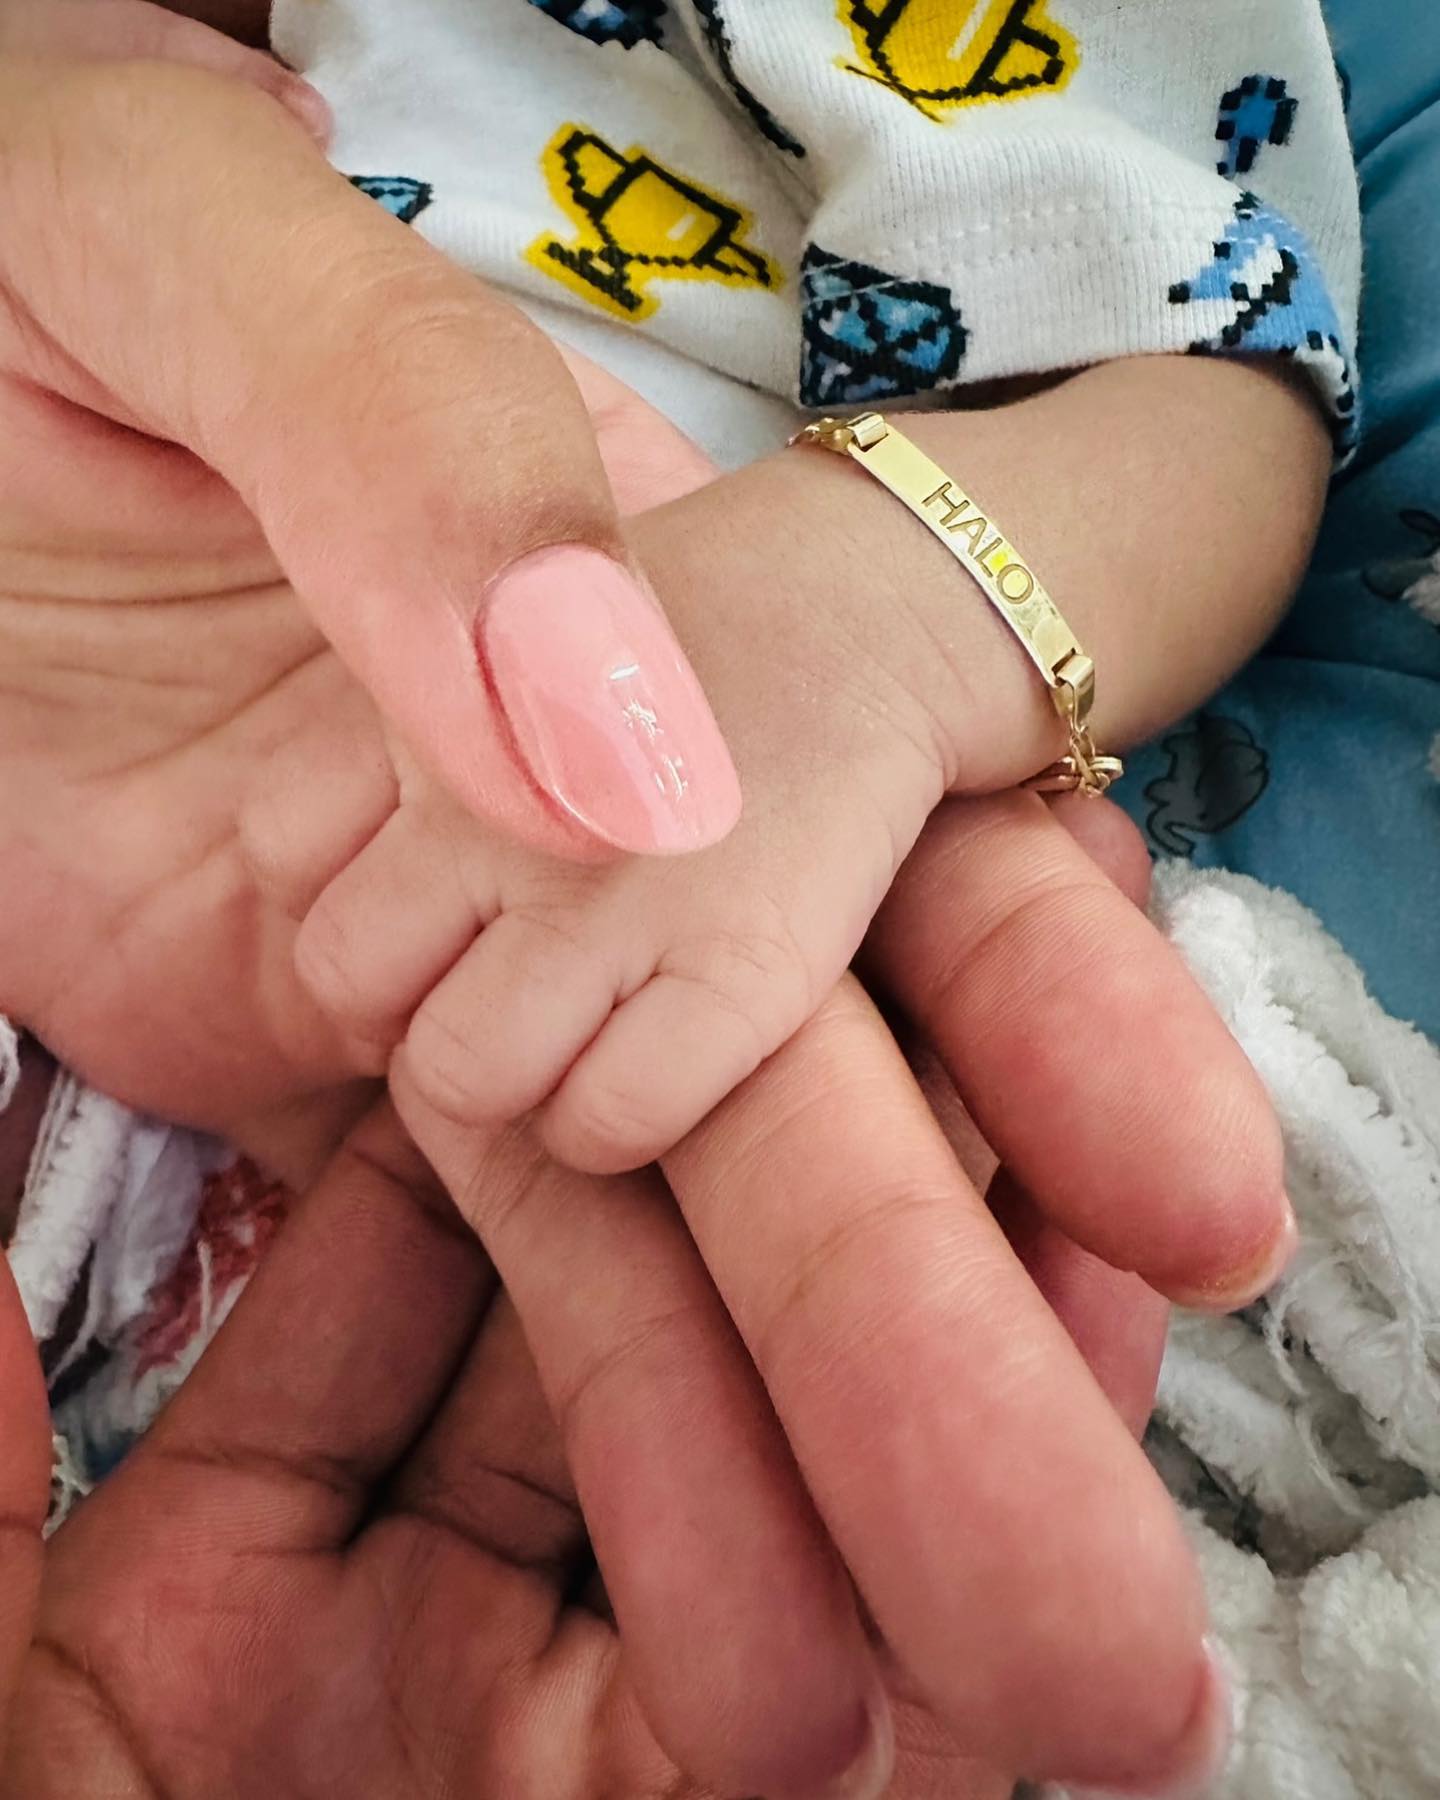 The couple also revealed the baby's first photo